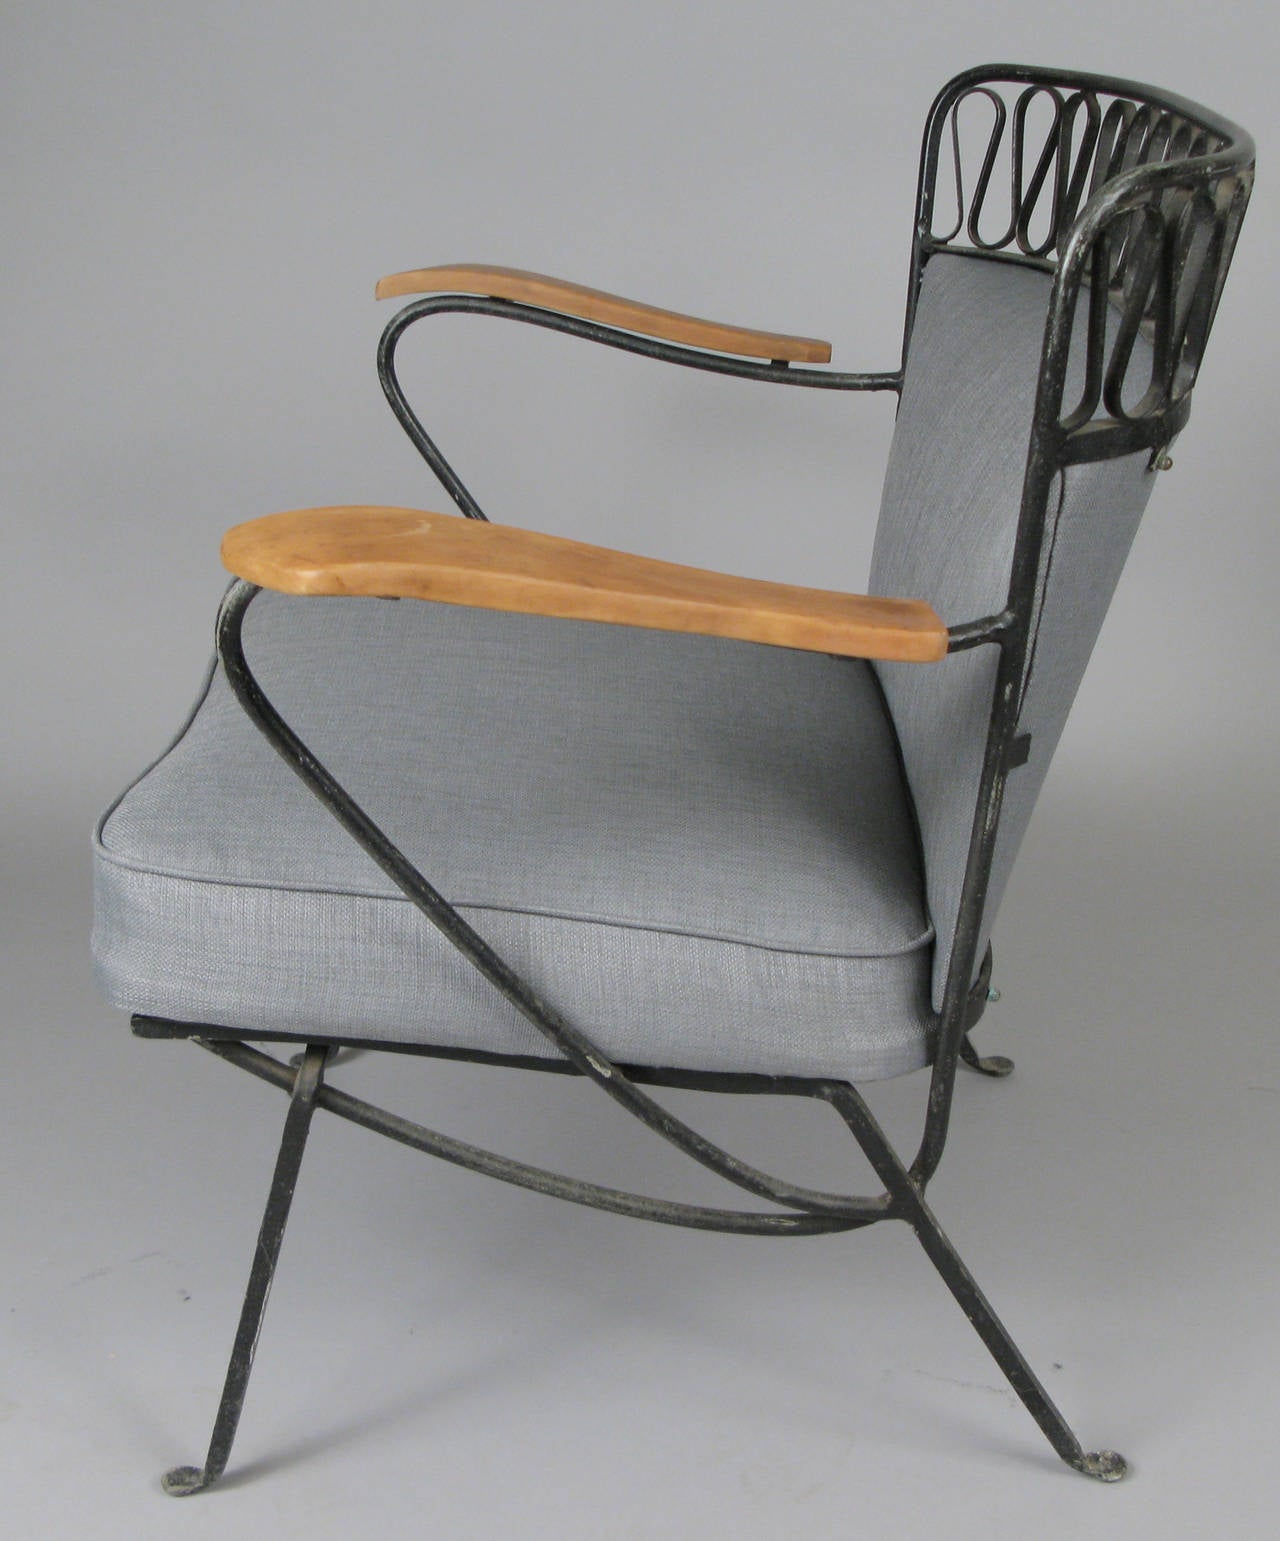 A rare and beautiful iron lounge chair designed by Maurizio Tempestini for Salterini, circa 1950. With the classic and iconic ribbon detailing and an upholstered seat and back and wood arms.